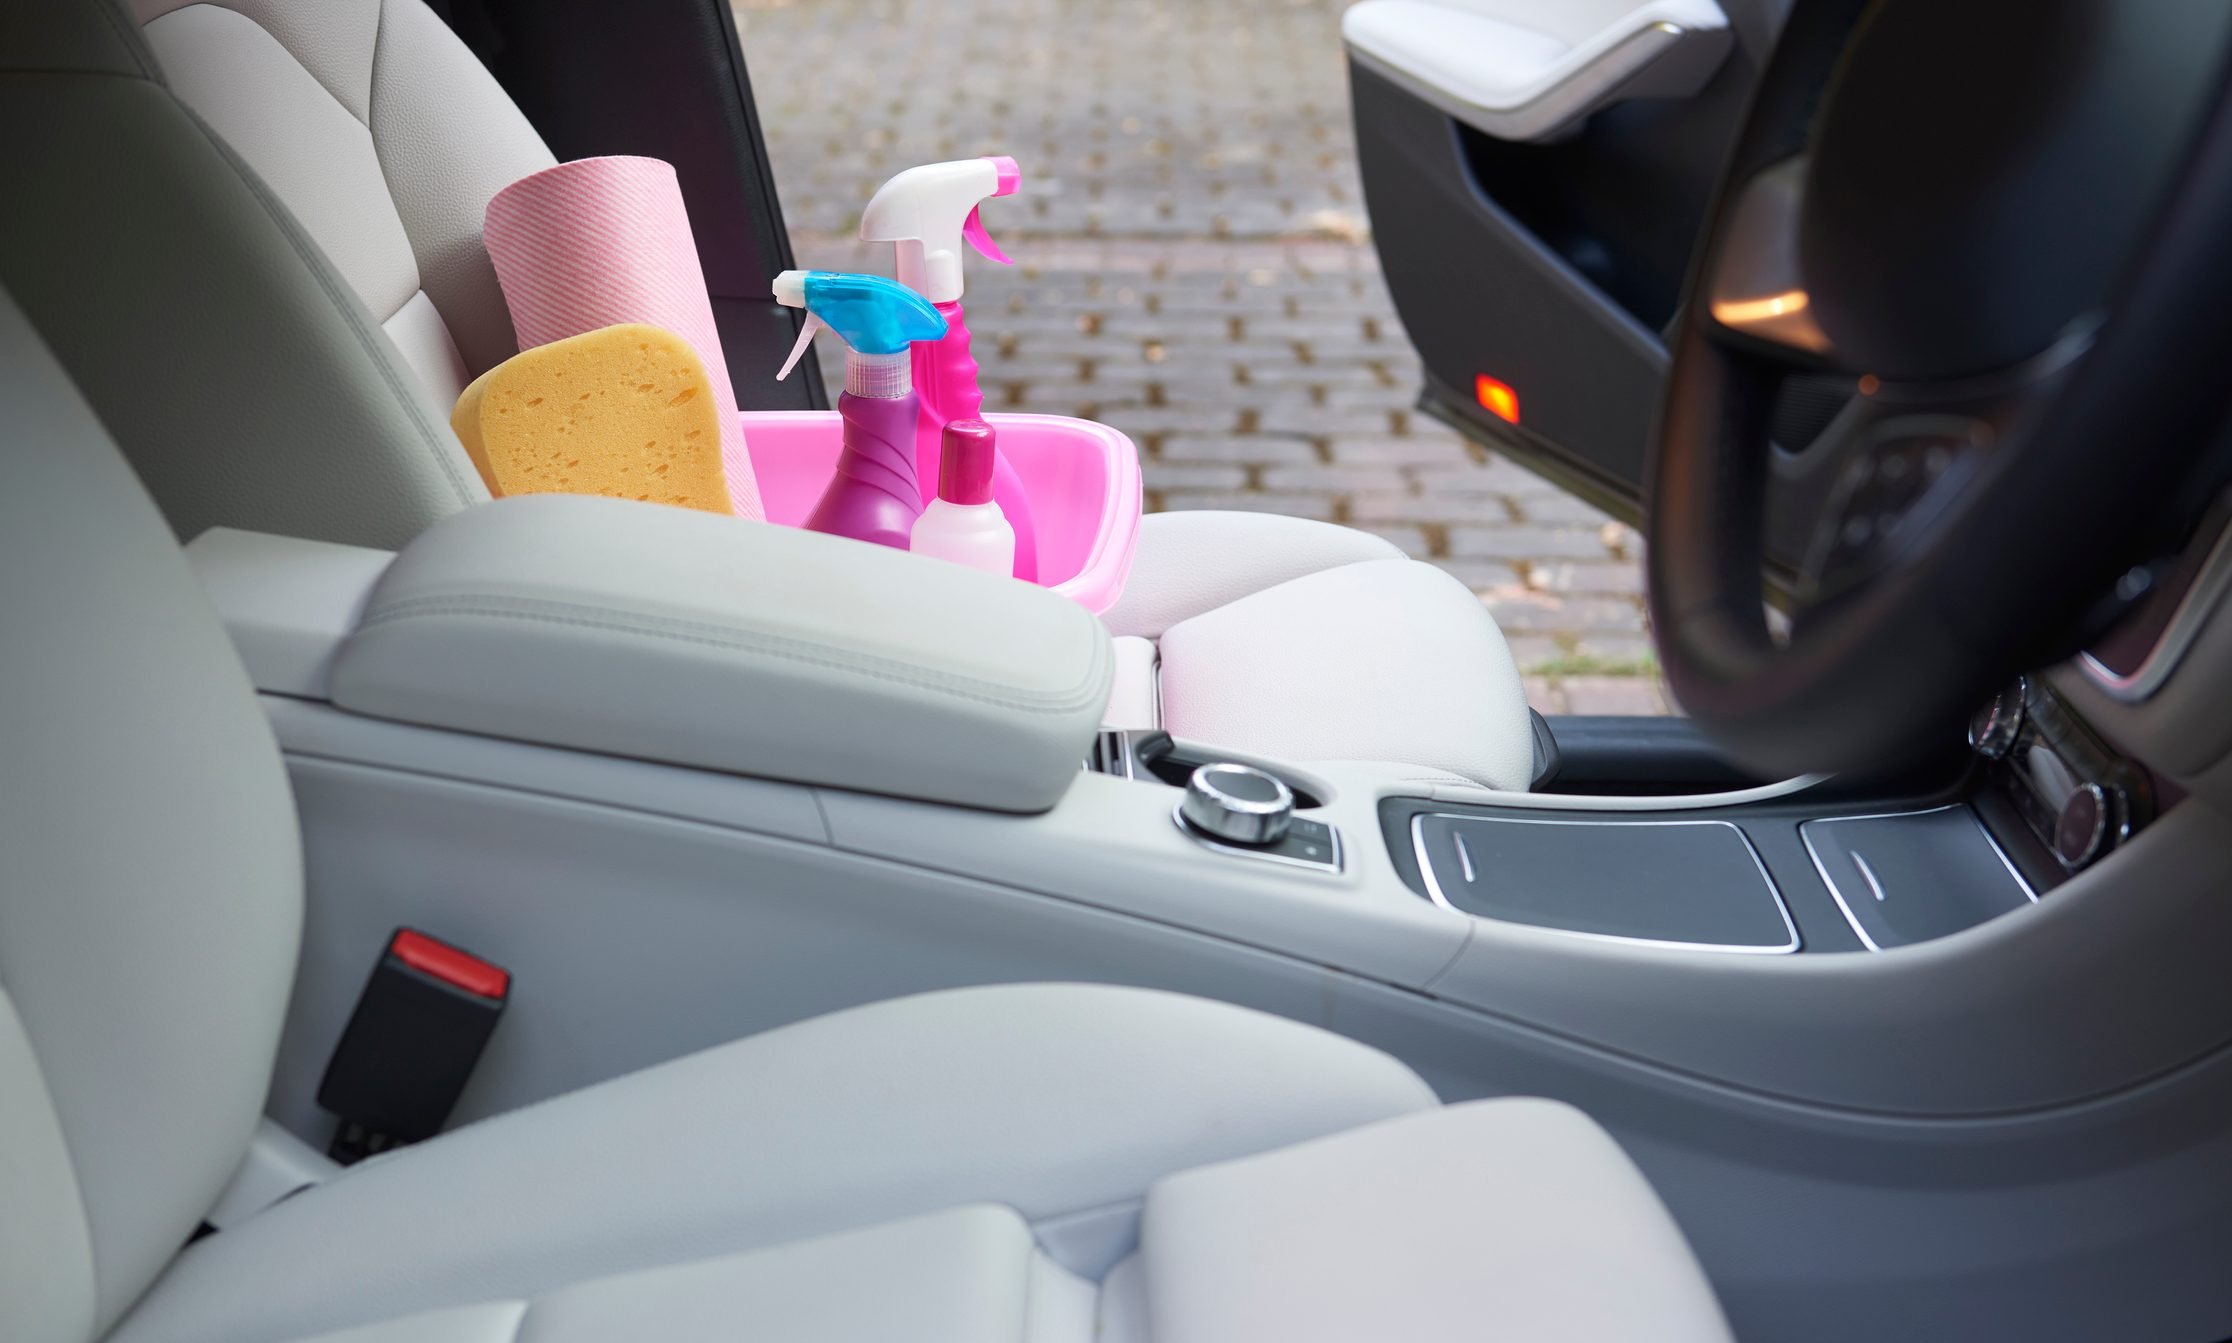 Cleaning products for car interior